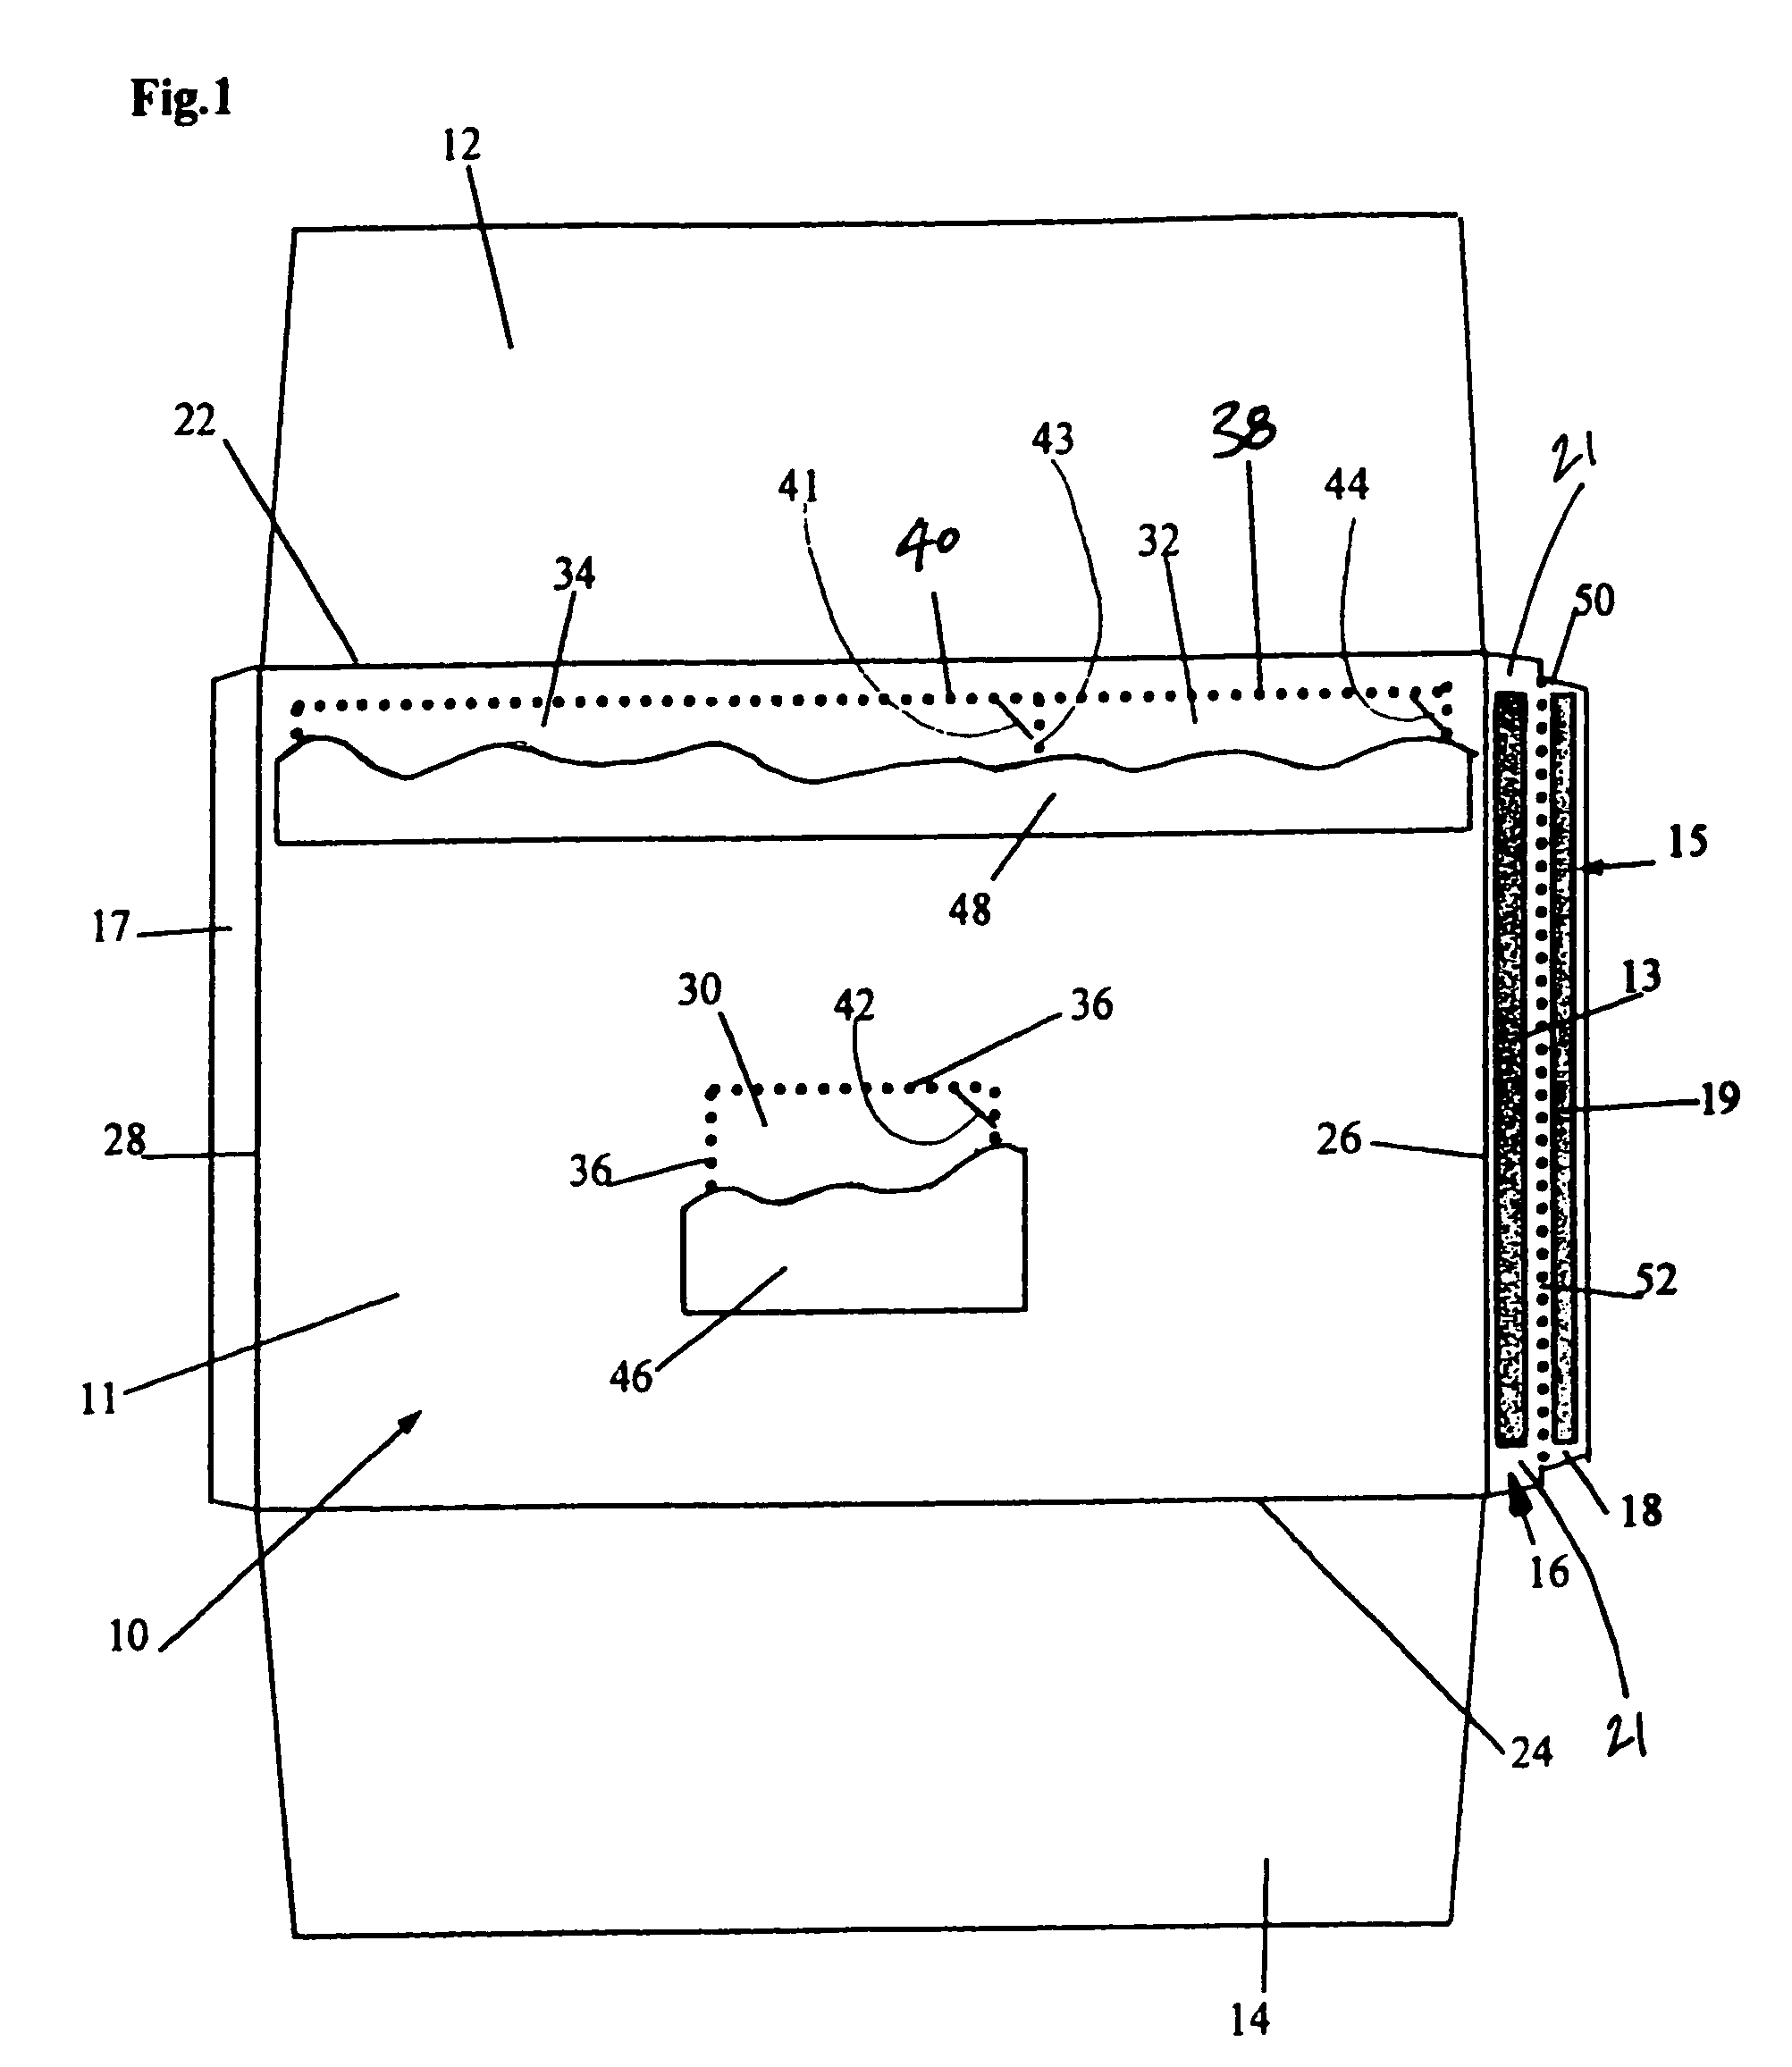 Reusable envelope structures and methods